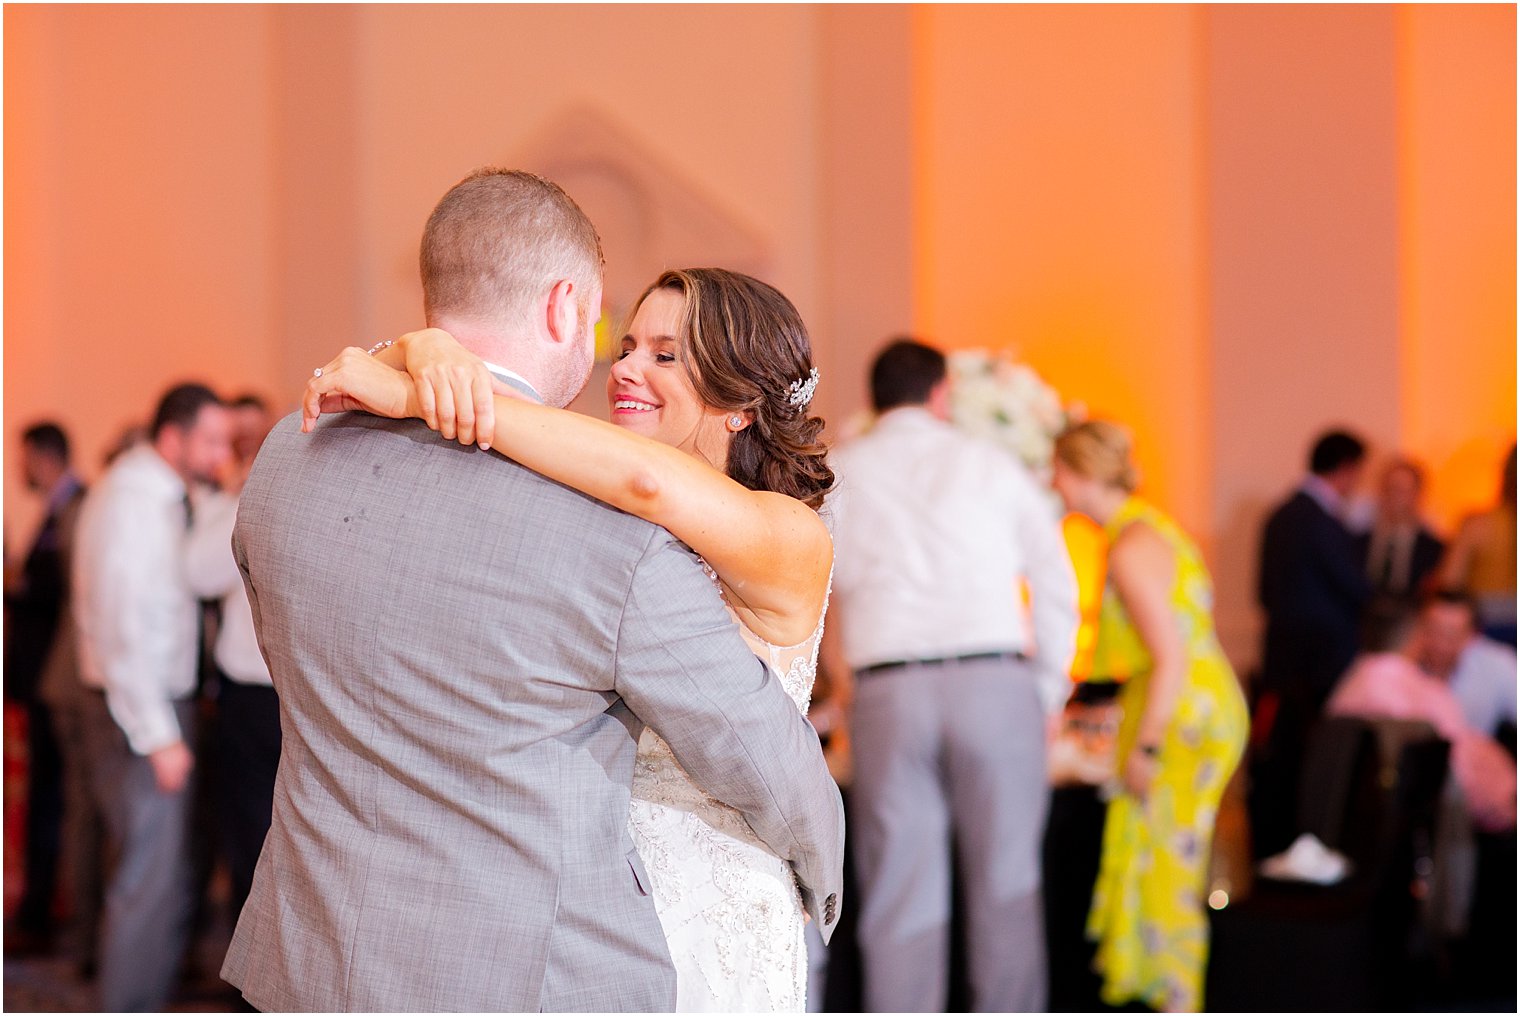 bride smiles at groom during dance at wedding reception at Ocean Place Resort and Spa